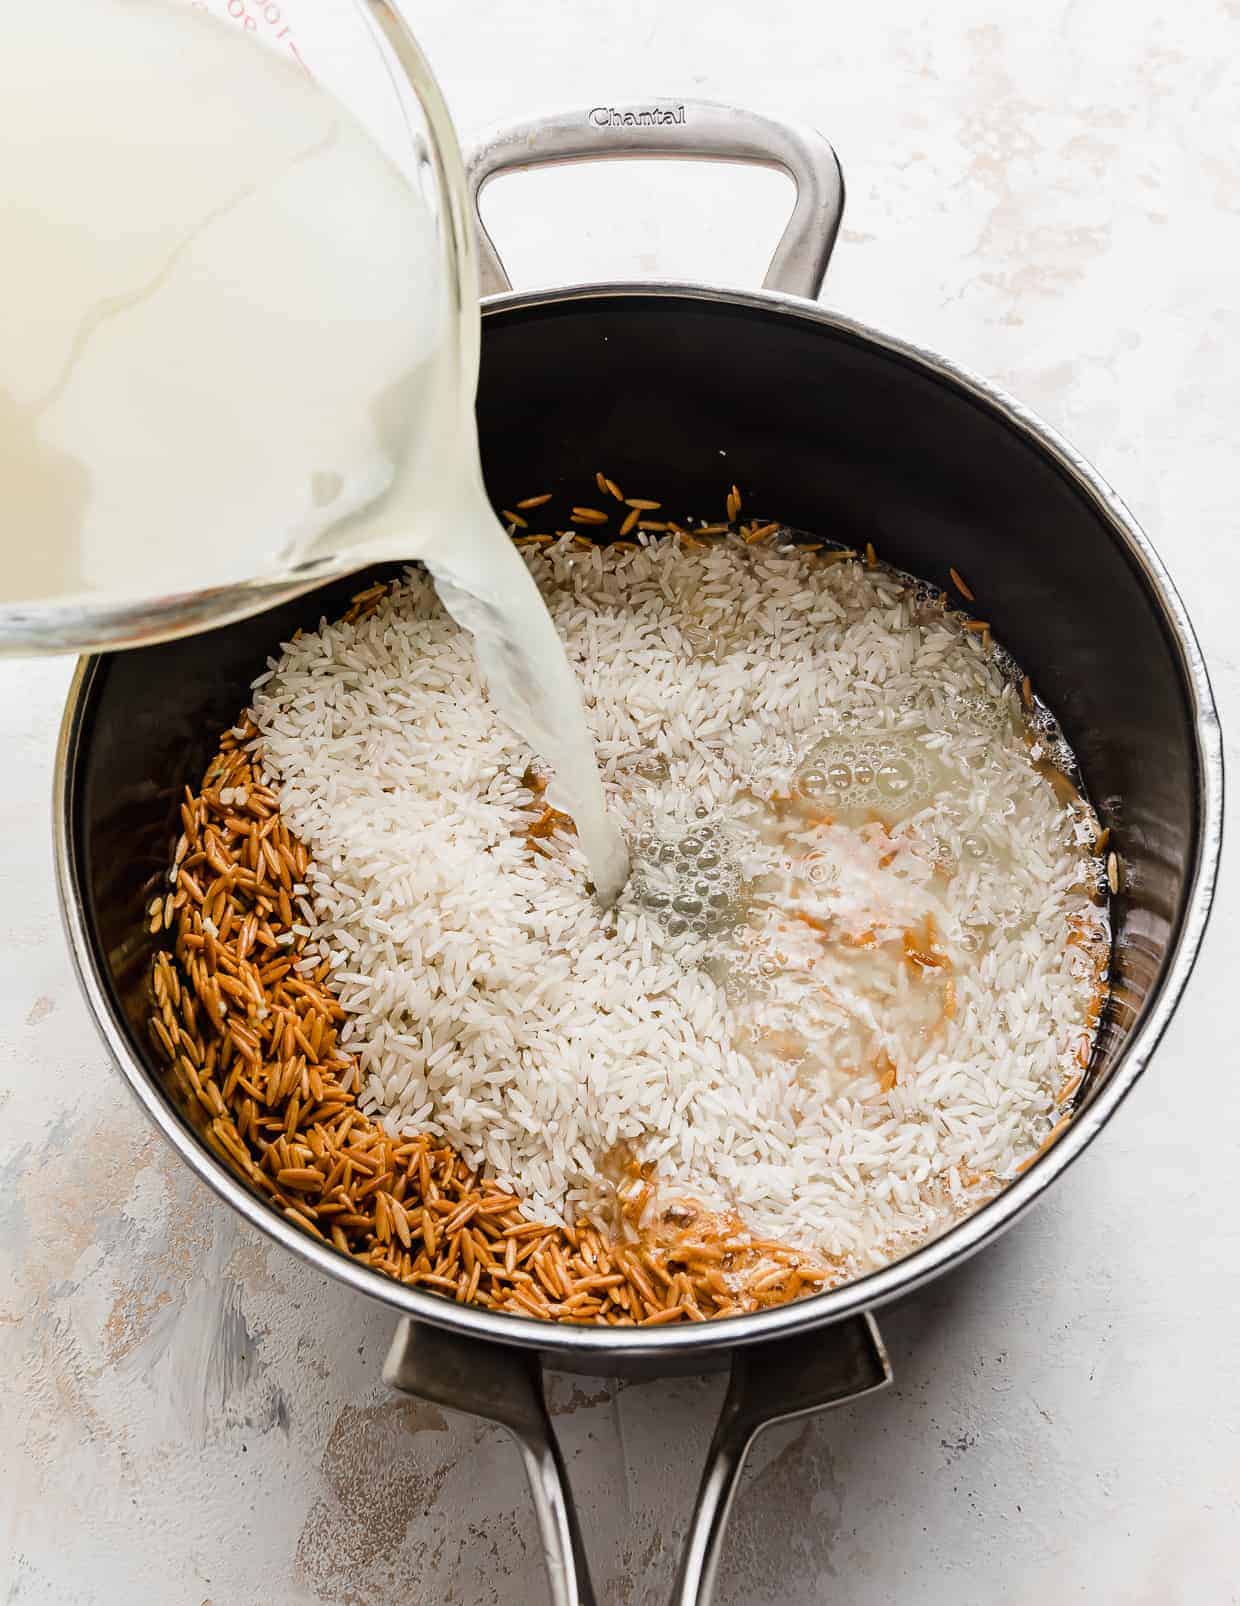 Chicken broth being poured overtop of white rice and orzo in a saucepan.